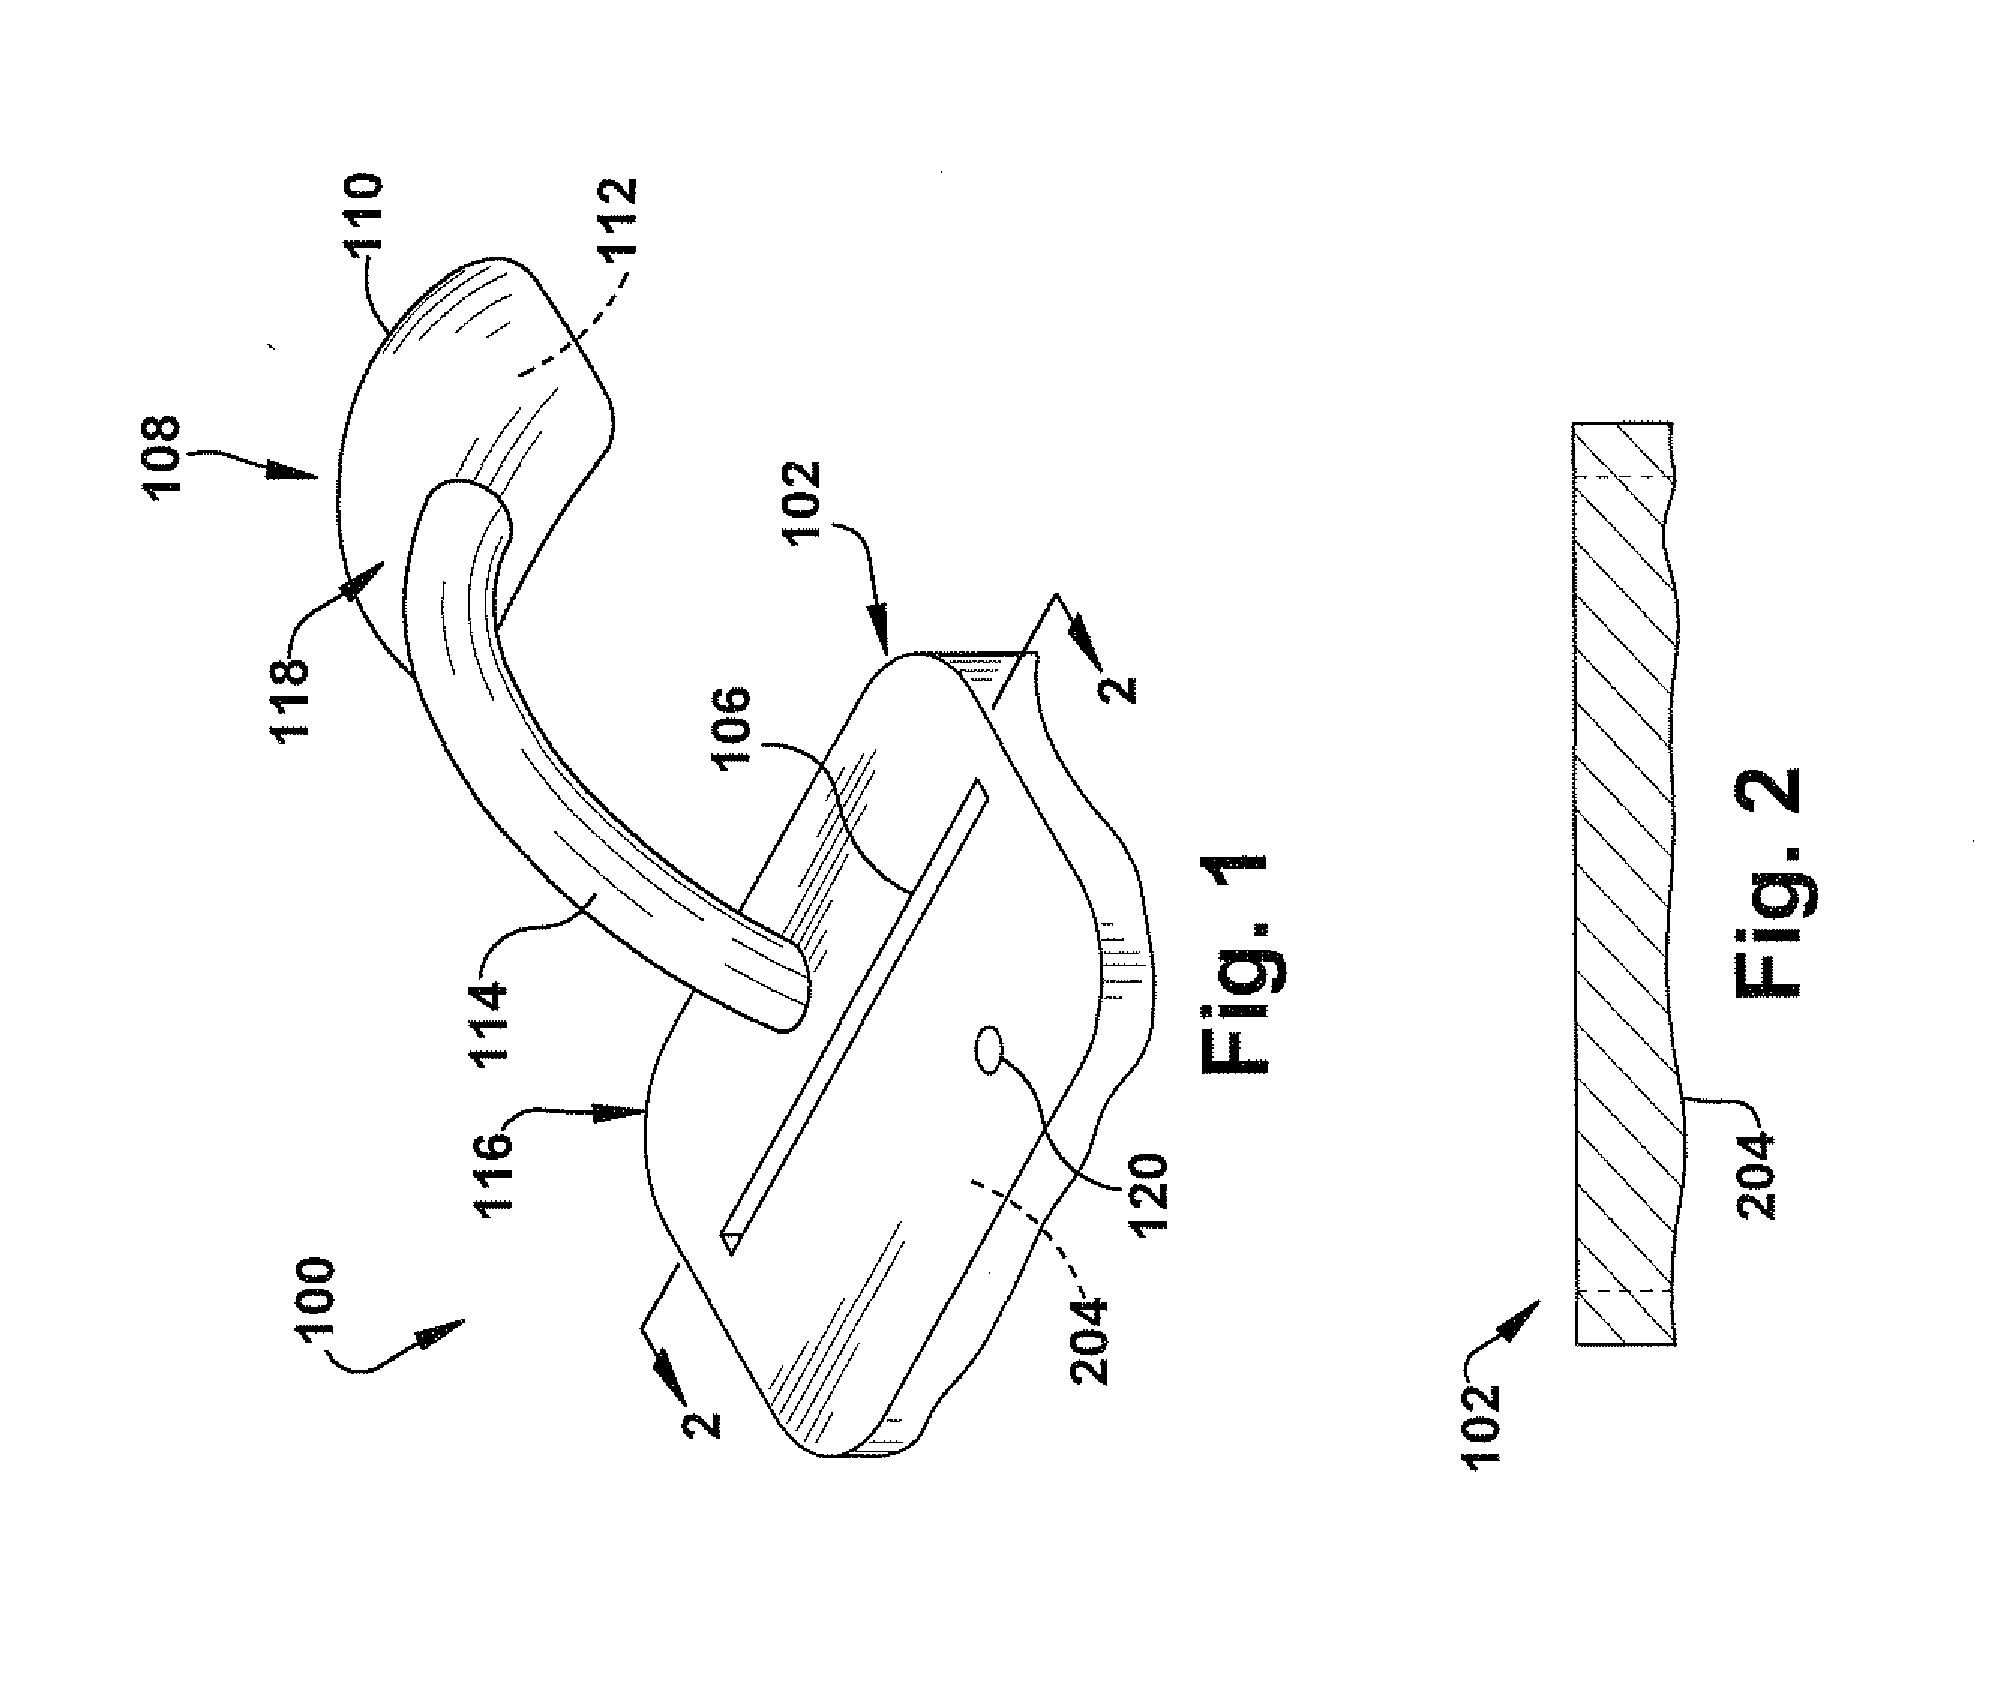 Positioning apparatus and method for a prosthetic implant